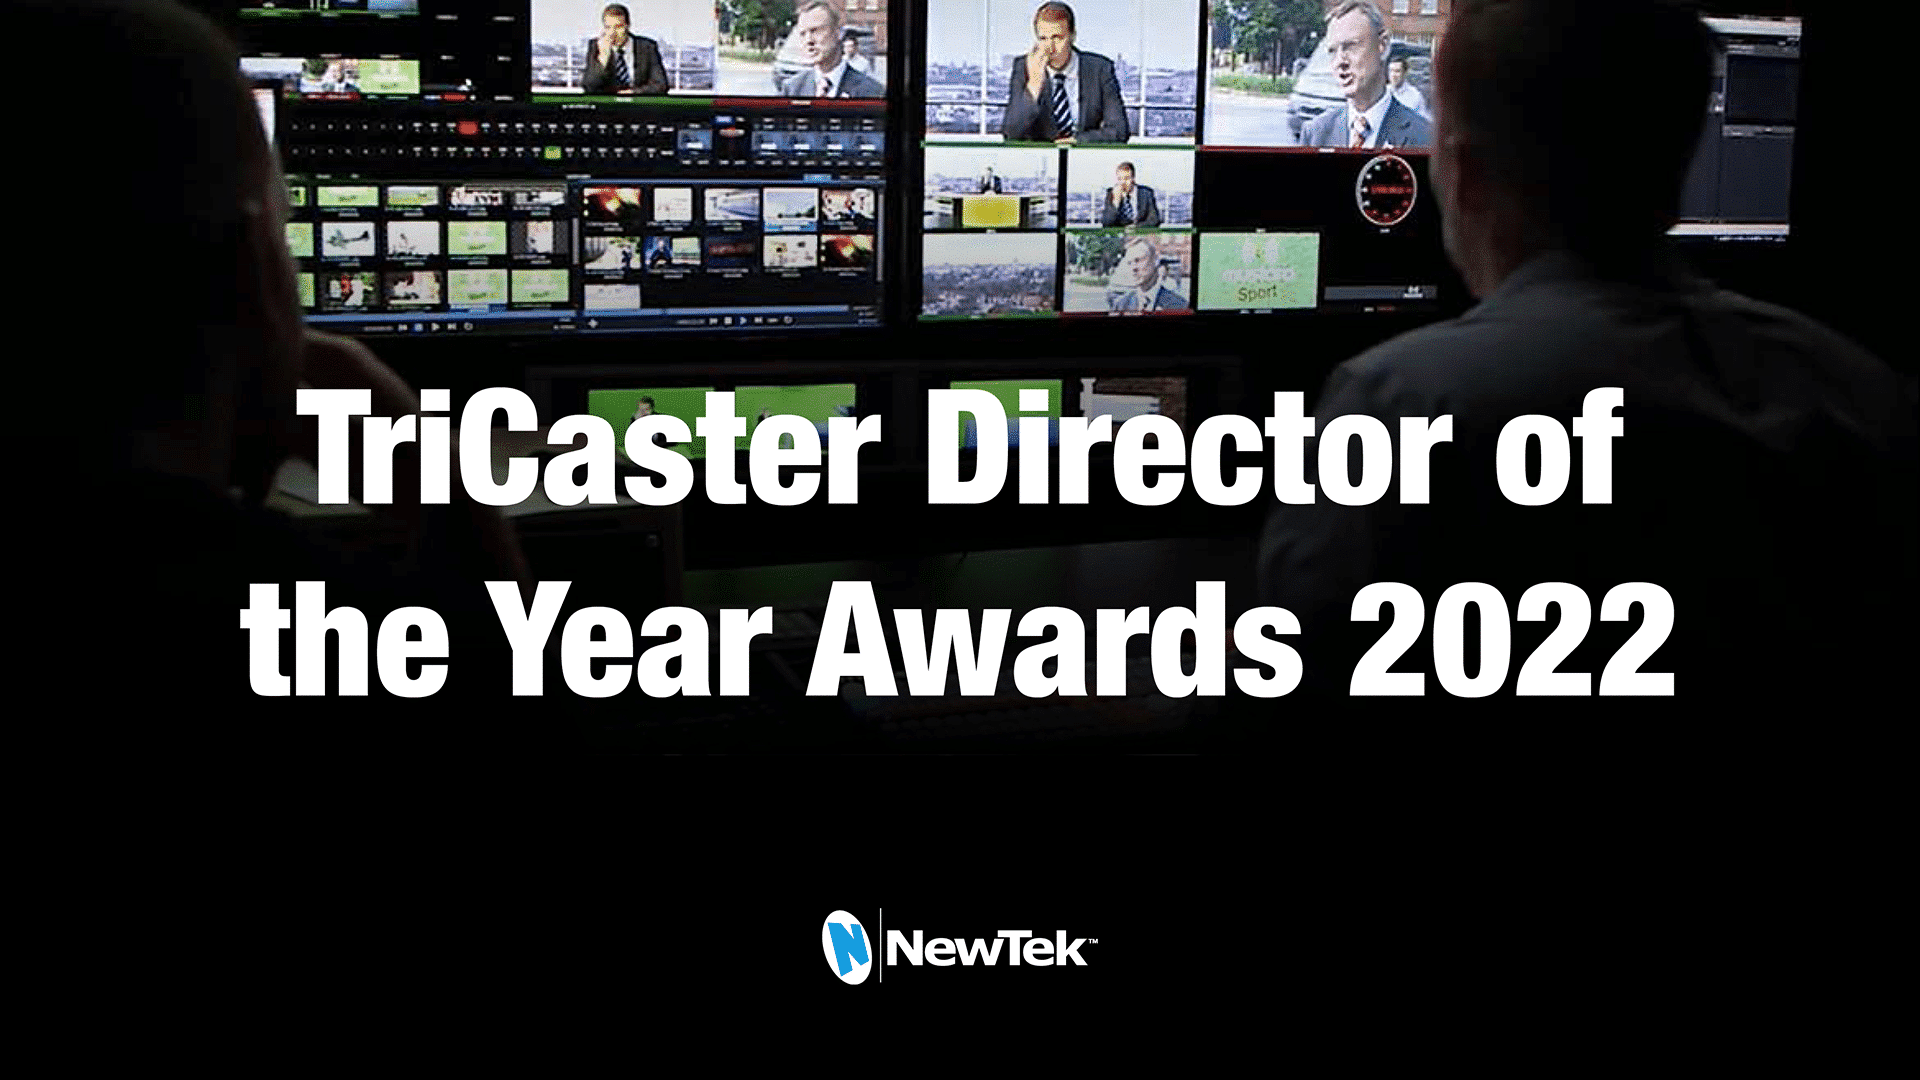 TriCaster Director of the Year Award 2022